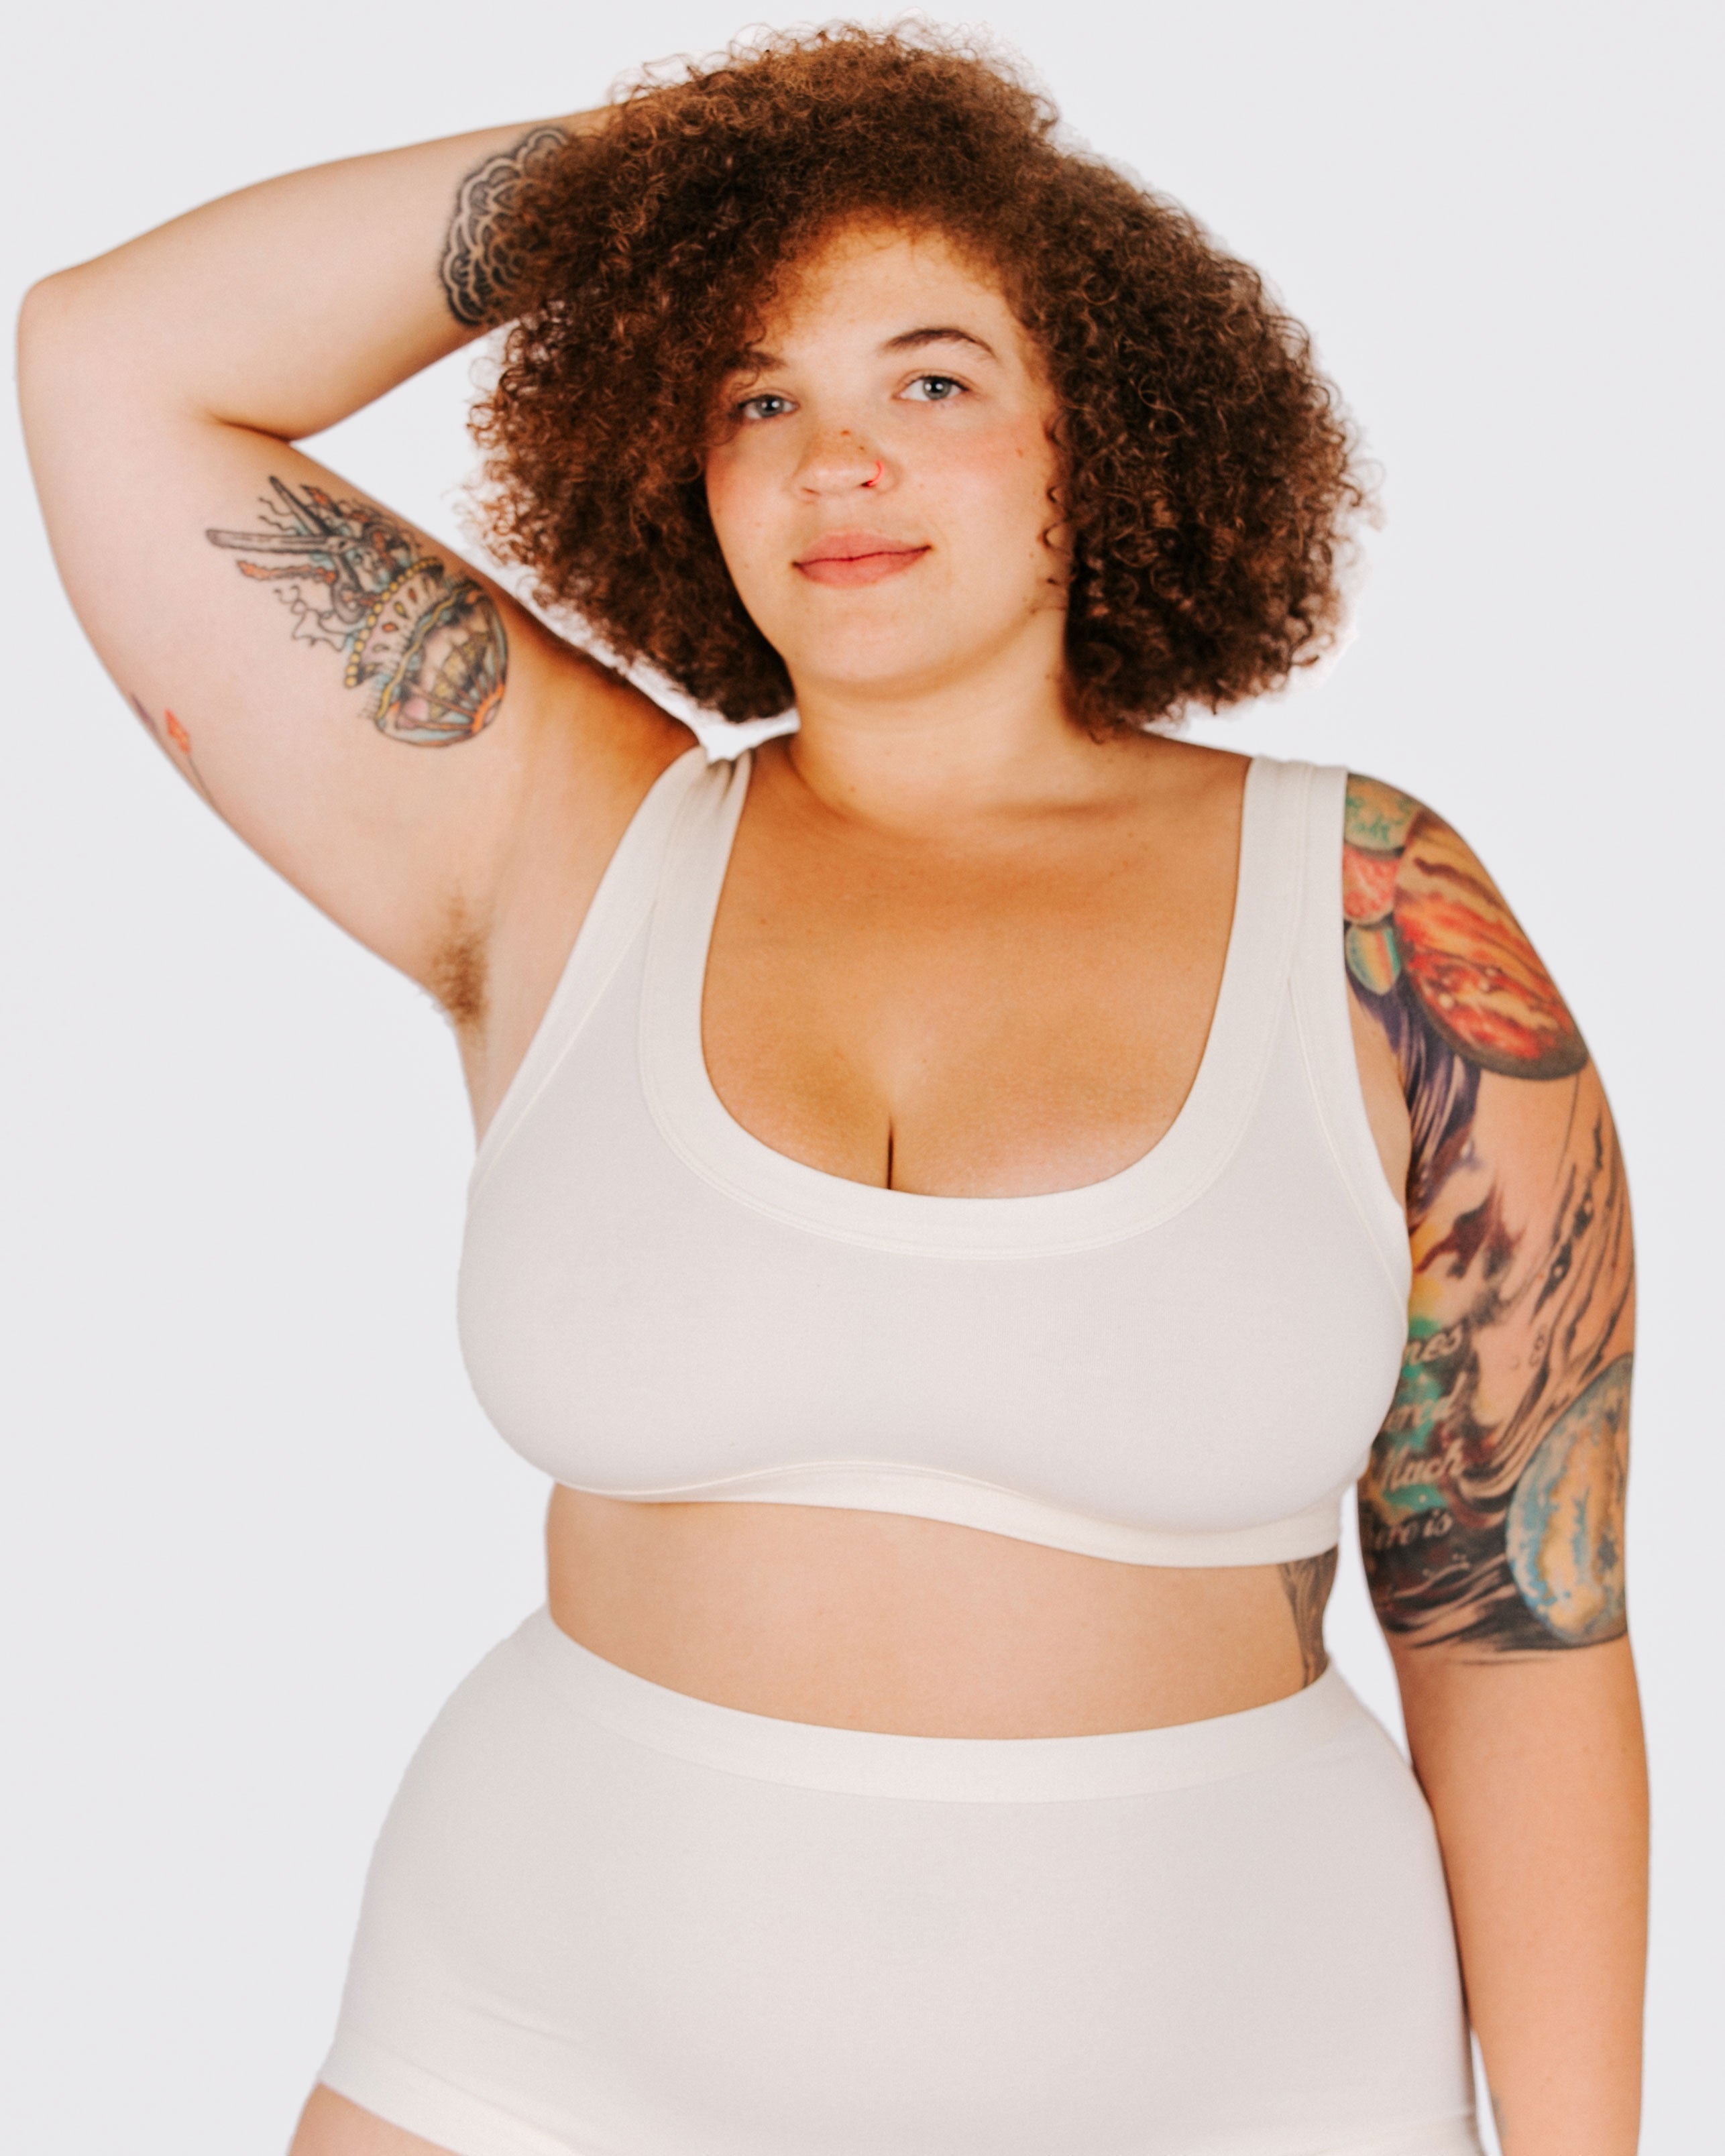 Bralette Bodies in Motion – Thunderpants USA